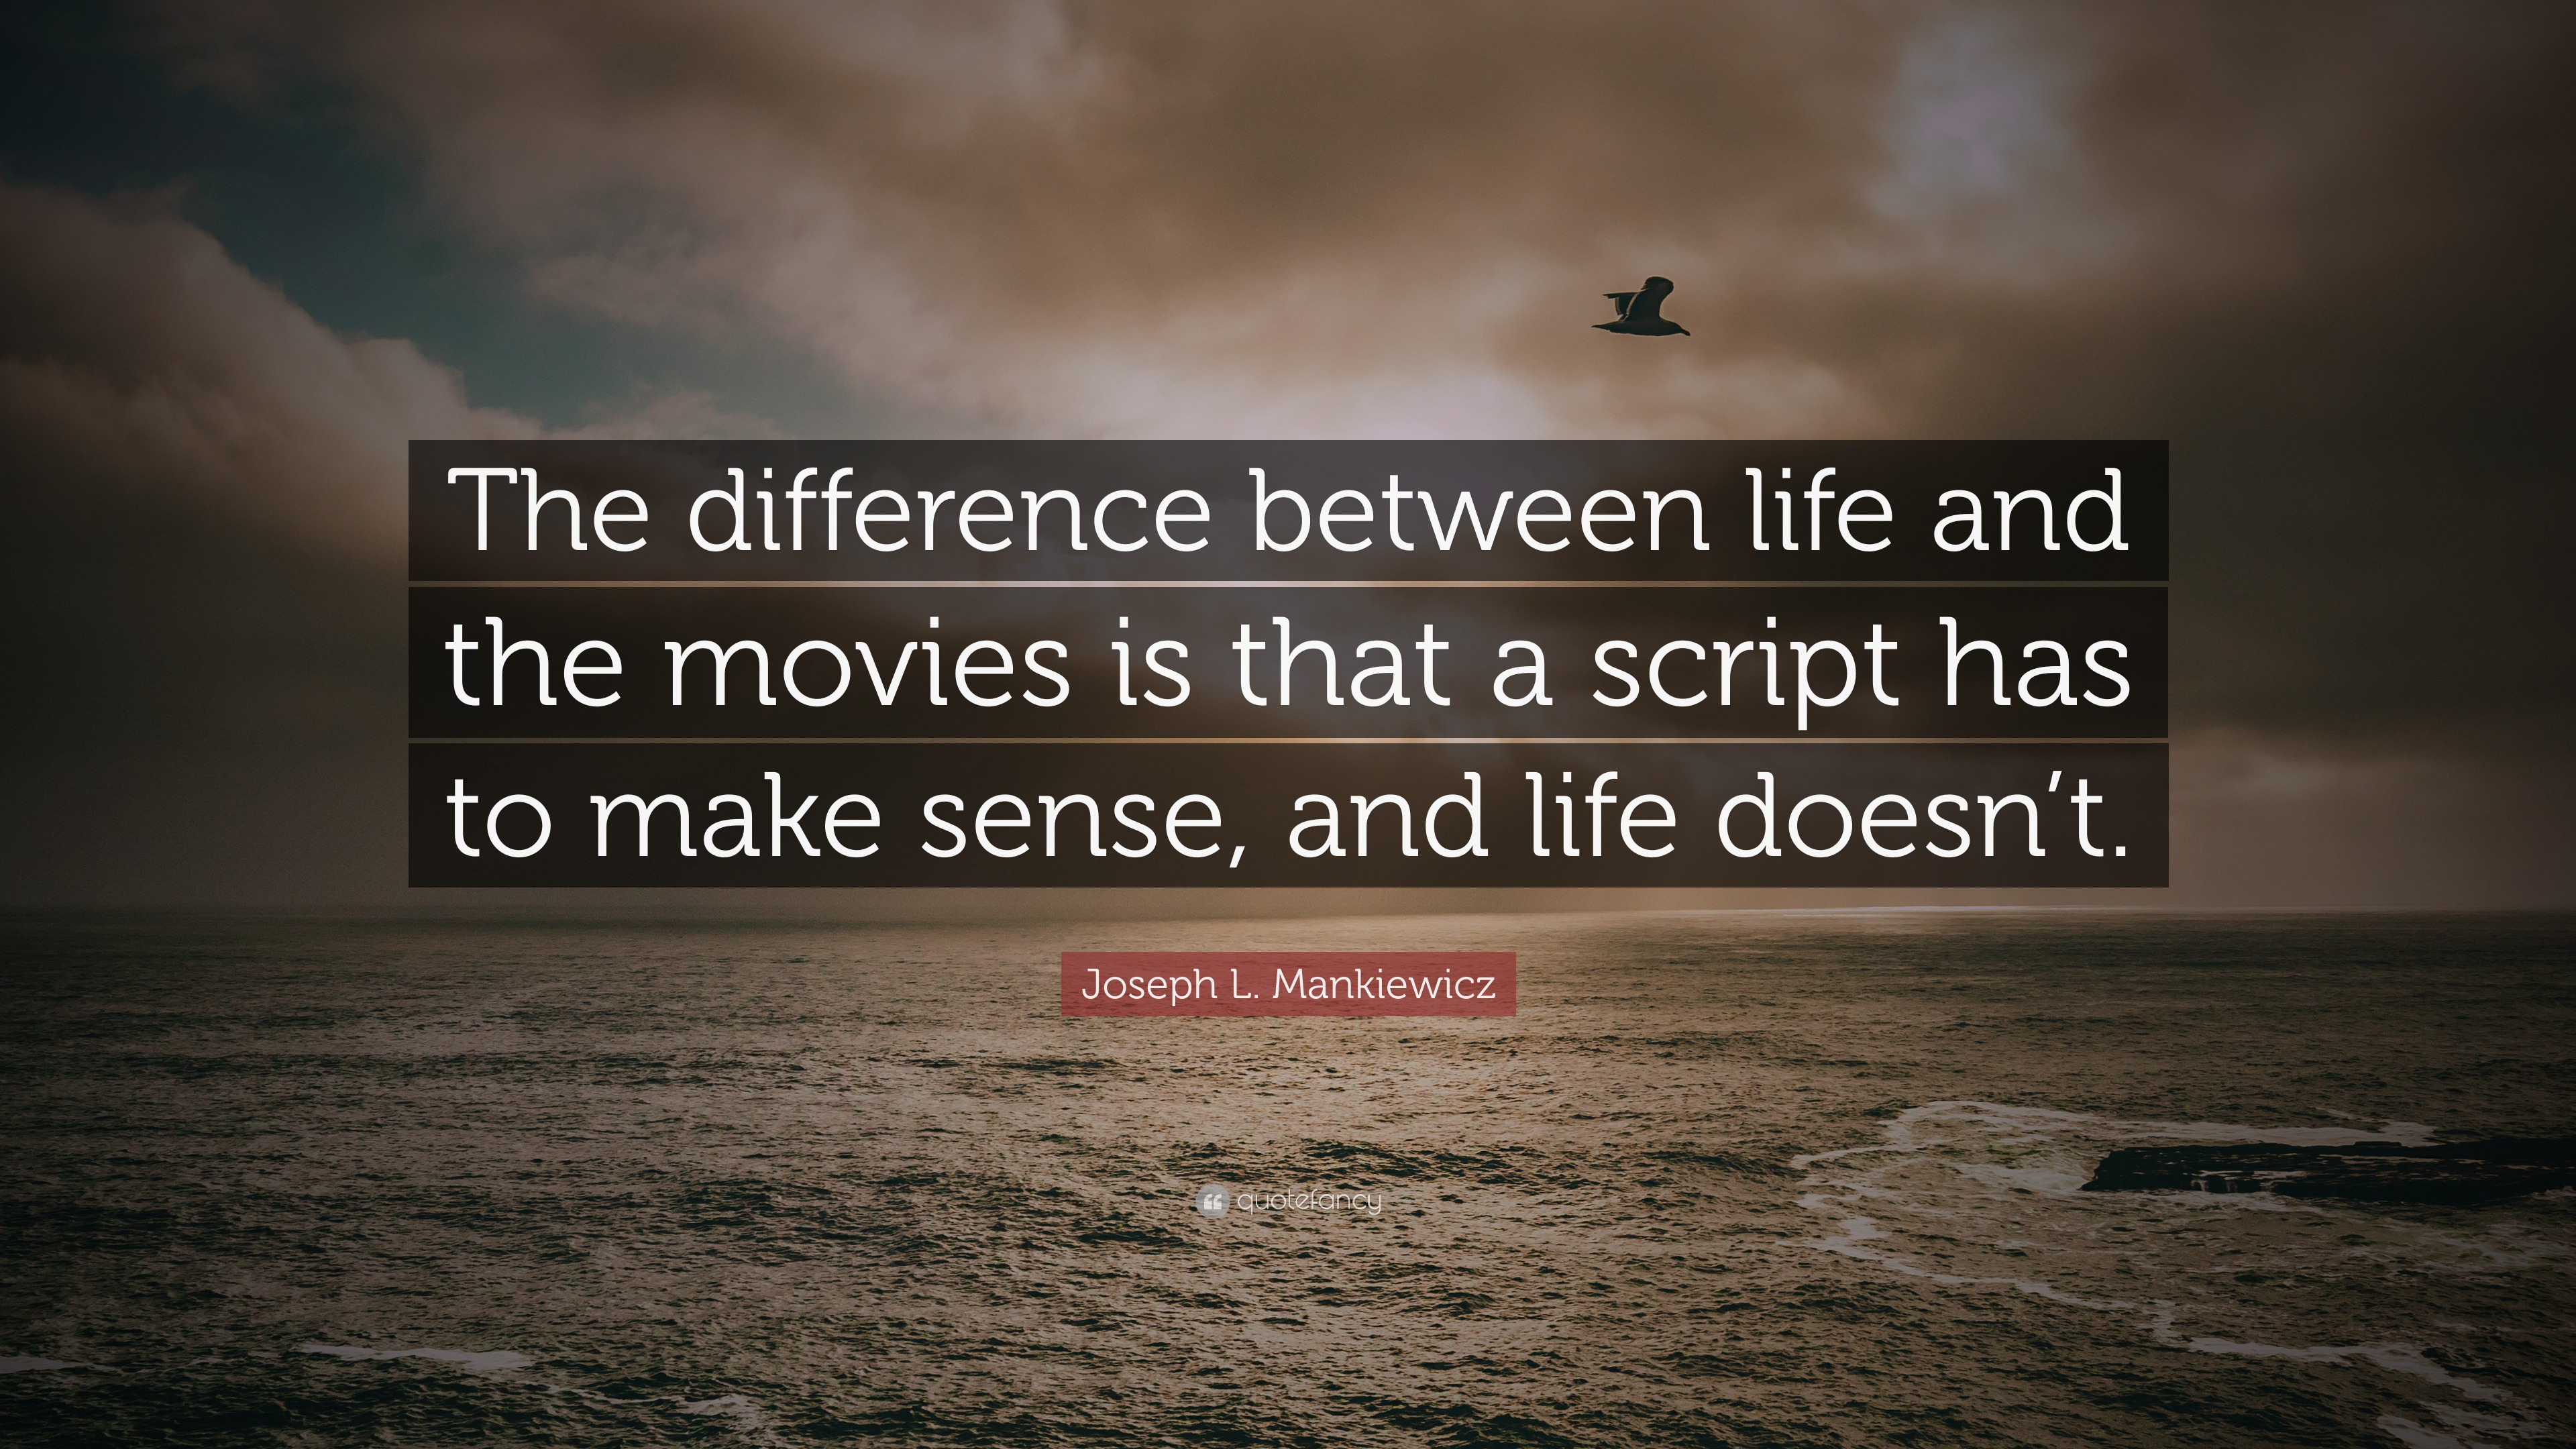 Joseph L Mankiewicz Quote “The difference between life and the movies is that